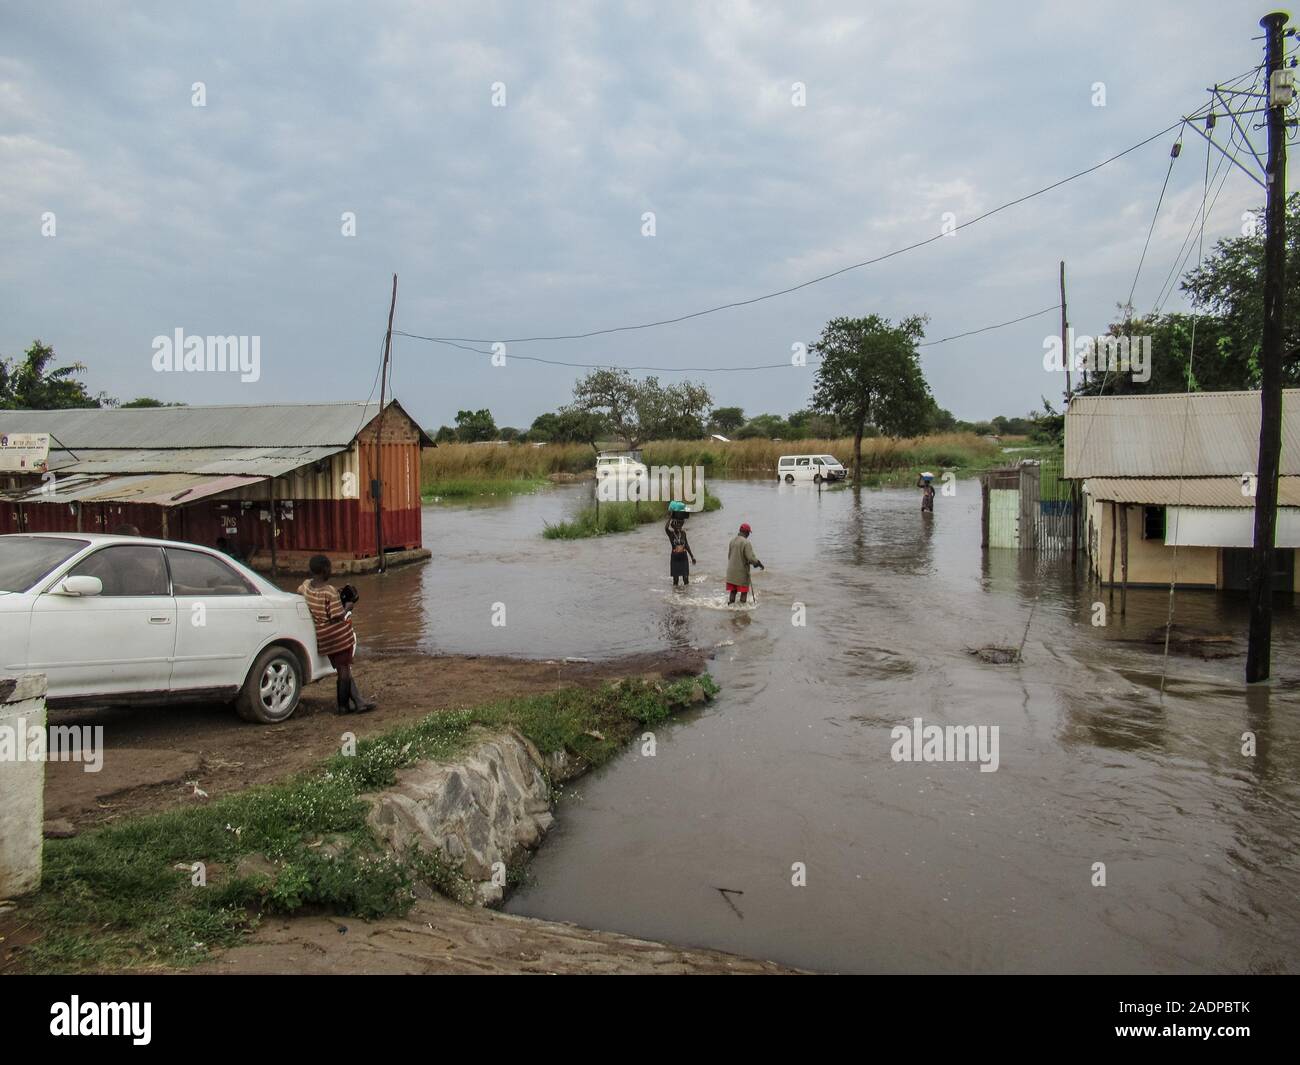 A woman carrying her belongings from a flooded home.Businesses and homes damaged by flooding in Elegu, northern Uganda, on the border with South Sudan. Thousands of people across East Africa are currently affected by flooding. Stock Photo